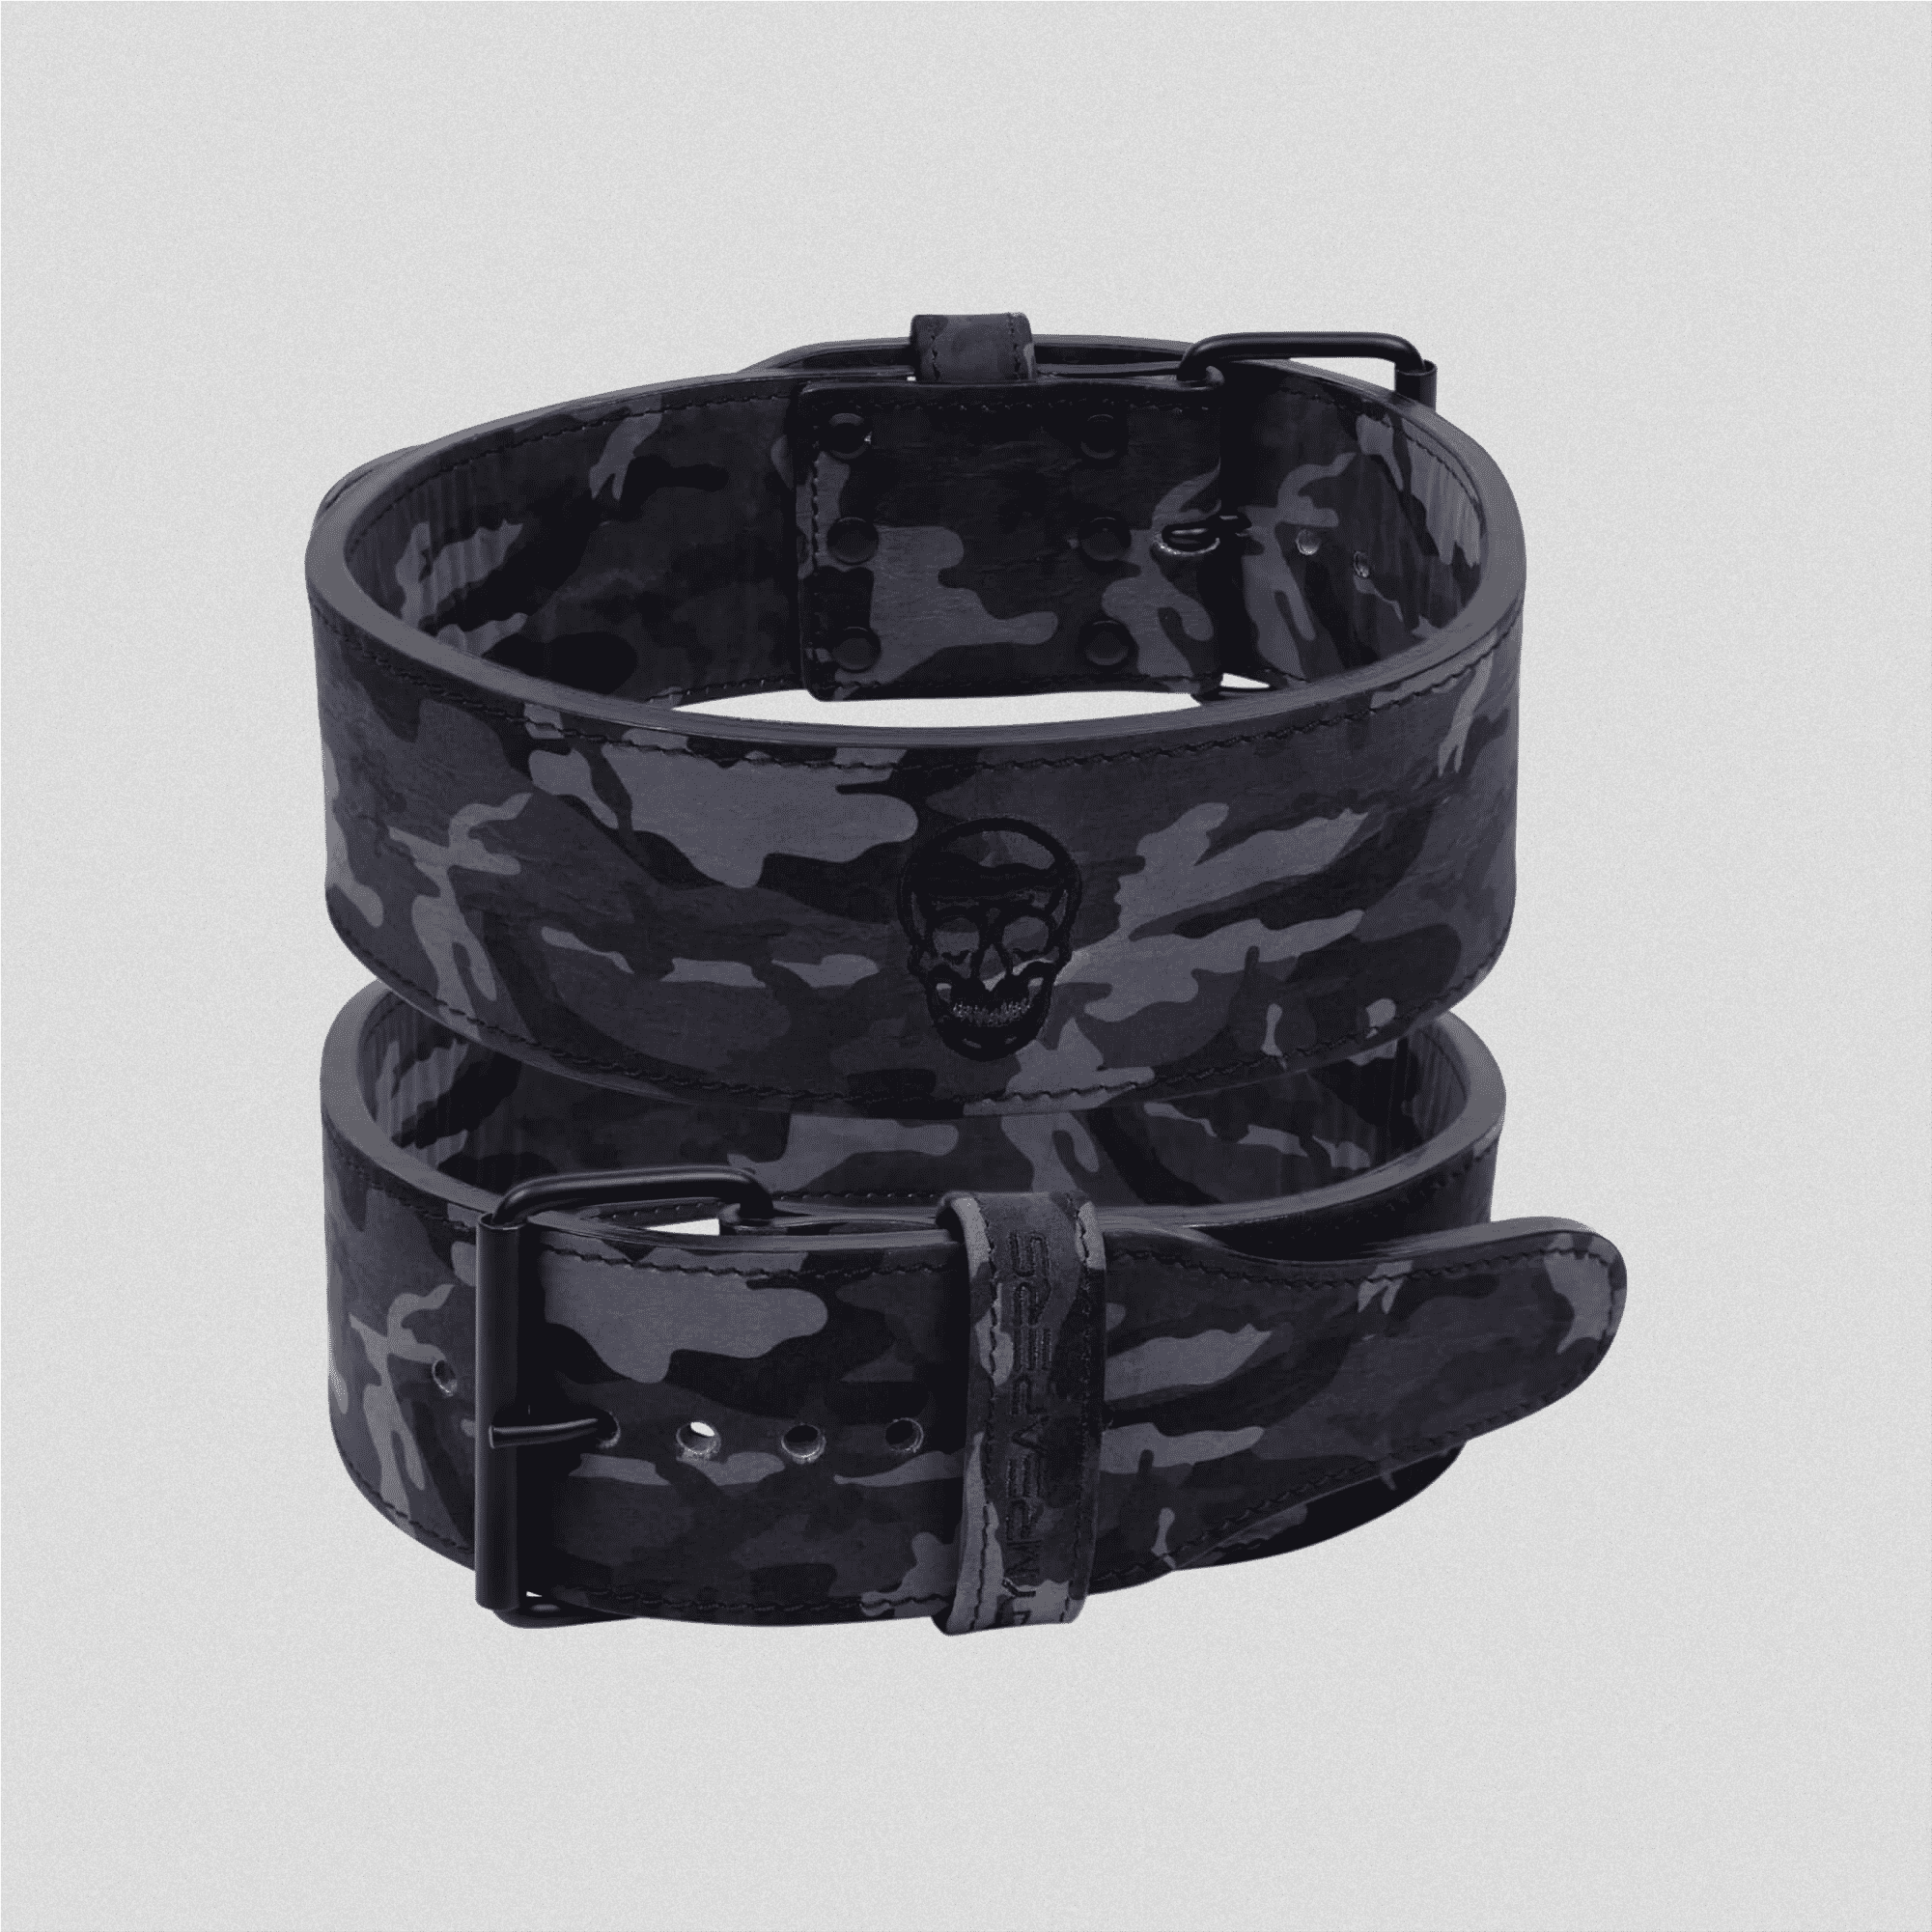 10mm single prong belt midnight camo stacked